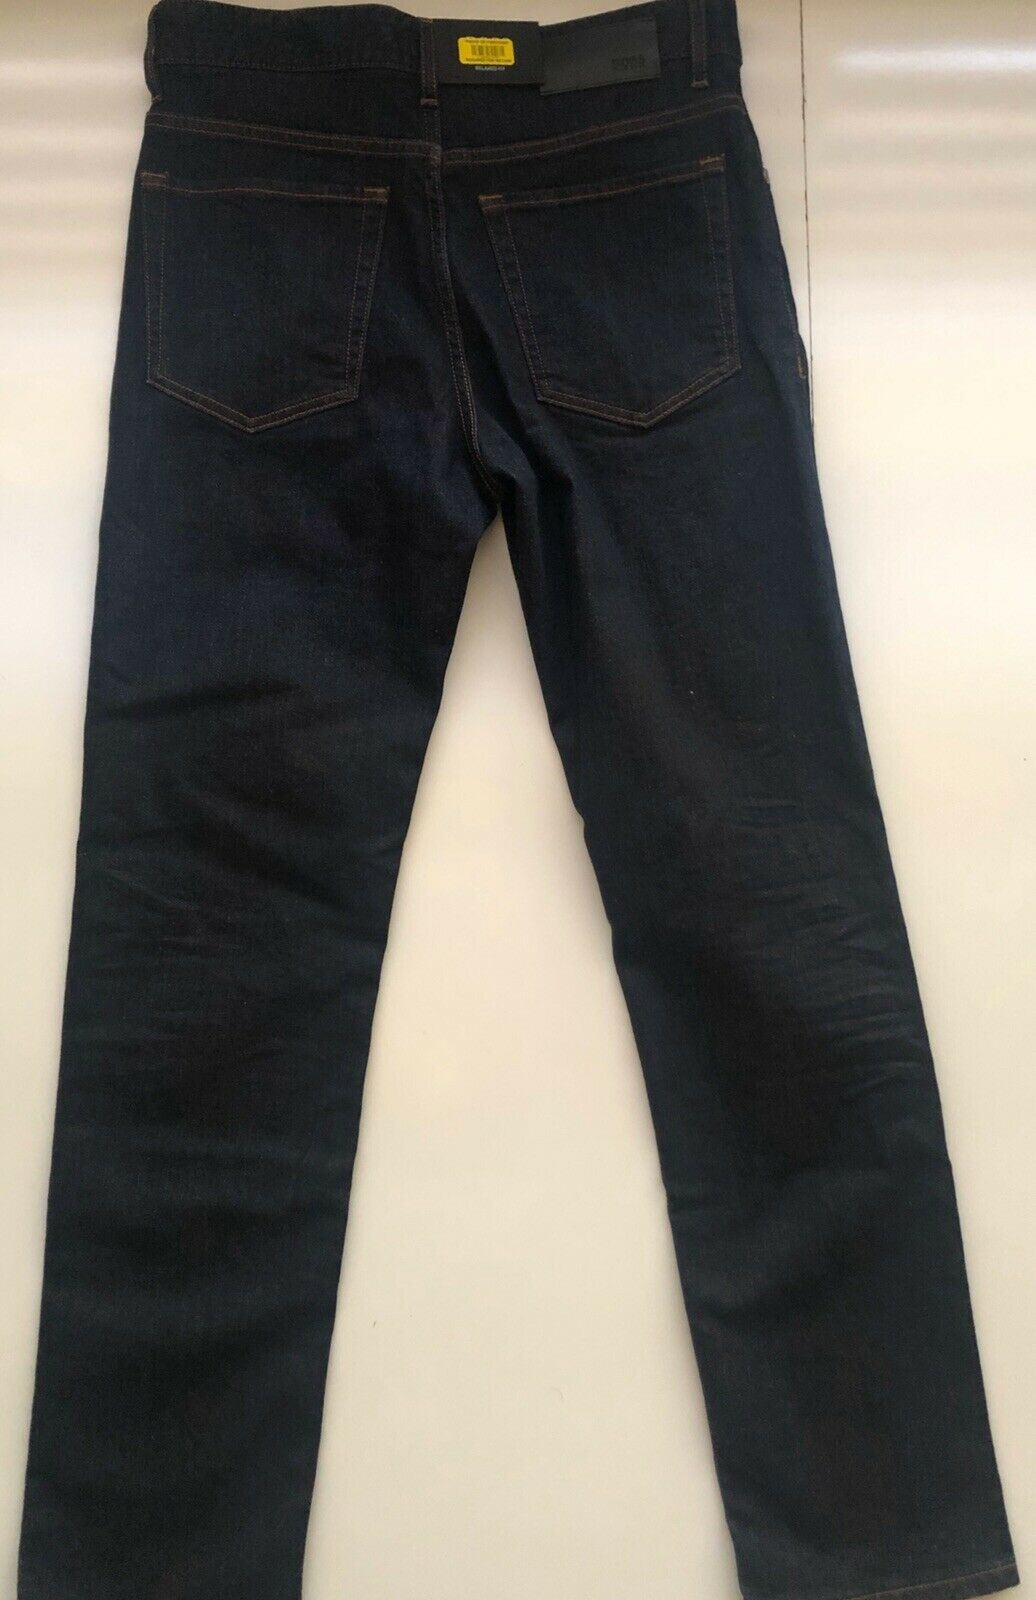 NWT $155 Hugo Boss Men's Albany Relaxed Fit Cotton Navy Denim Jeans Size 30/32